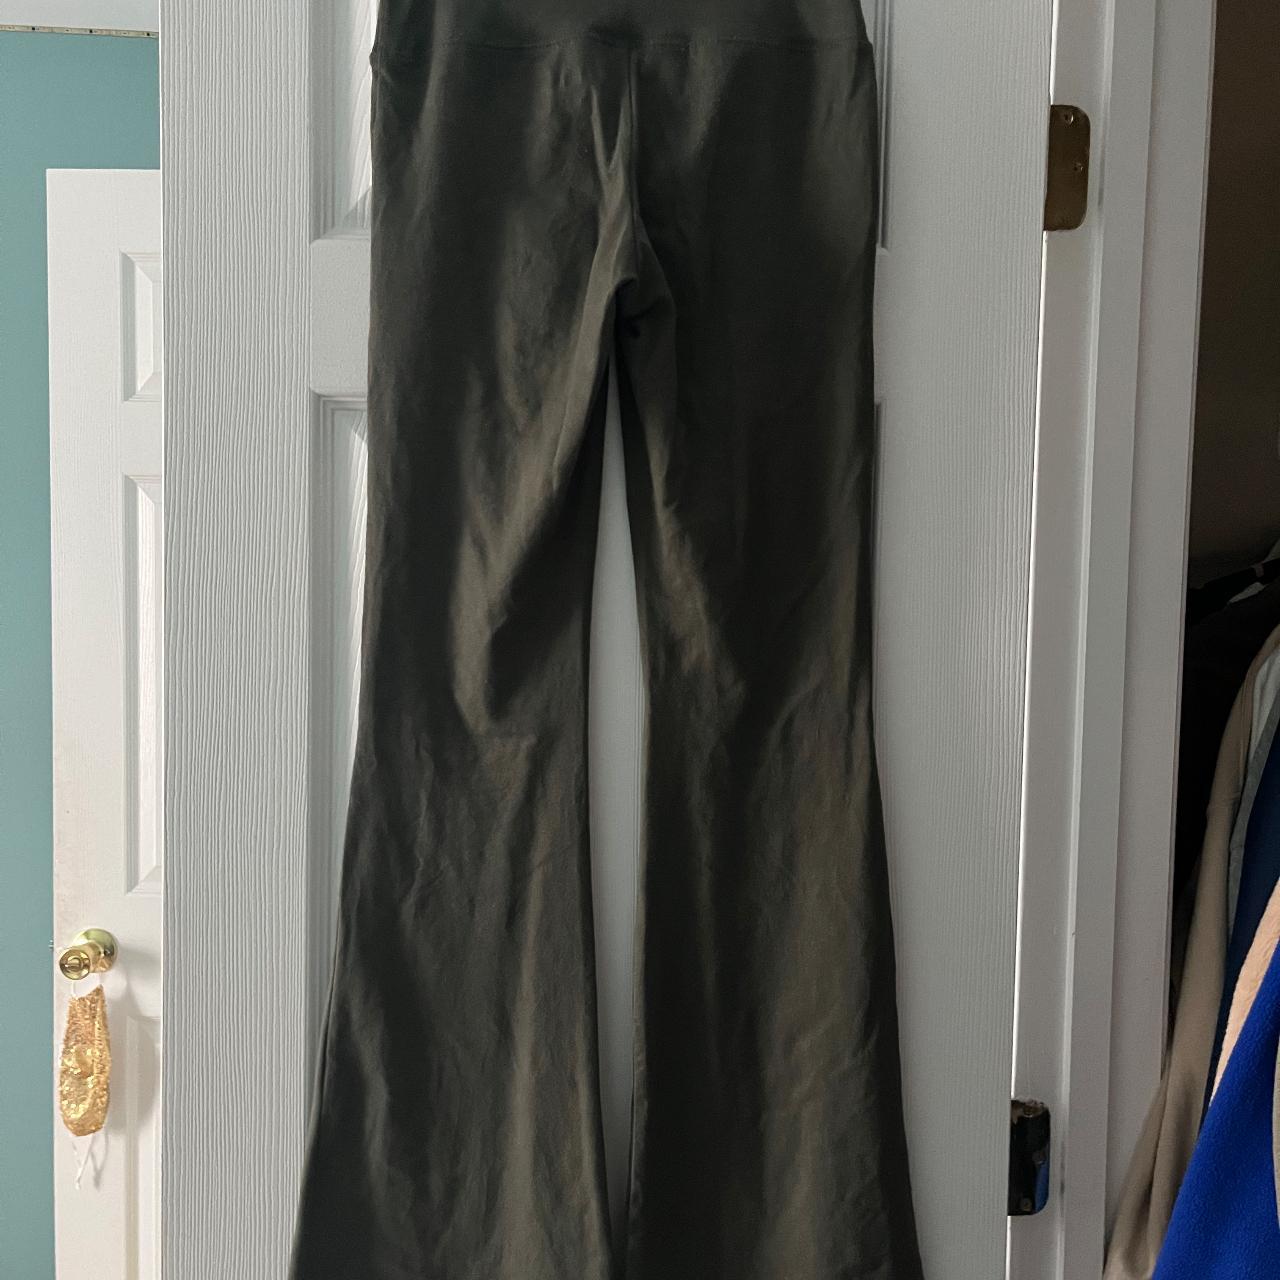 XS olive green flared leggings, Great Condition